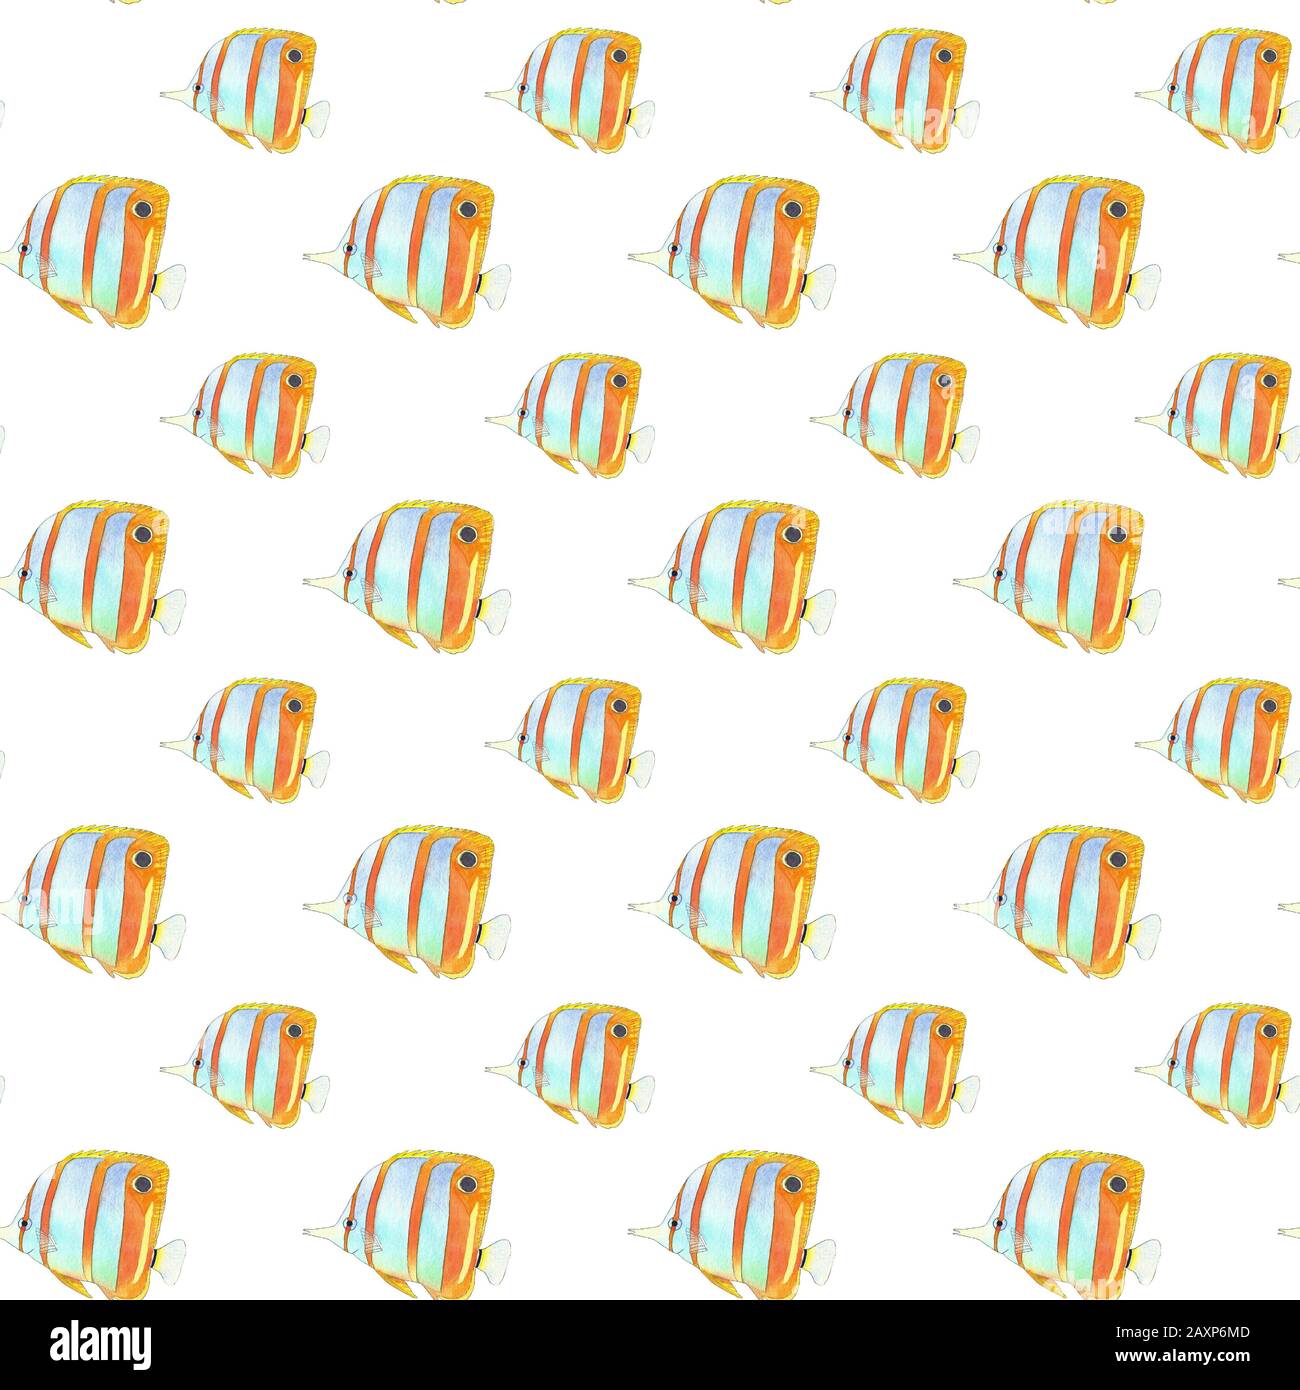 Seamless pattern of butterfly fish. Hand drawing sketch on white background. Watercolor illustration can be used in greeting cards, posters, flyers, banners, logo, further design etc. Stock Photo